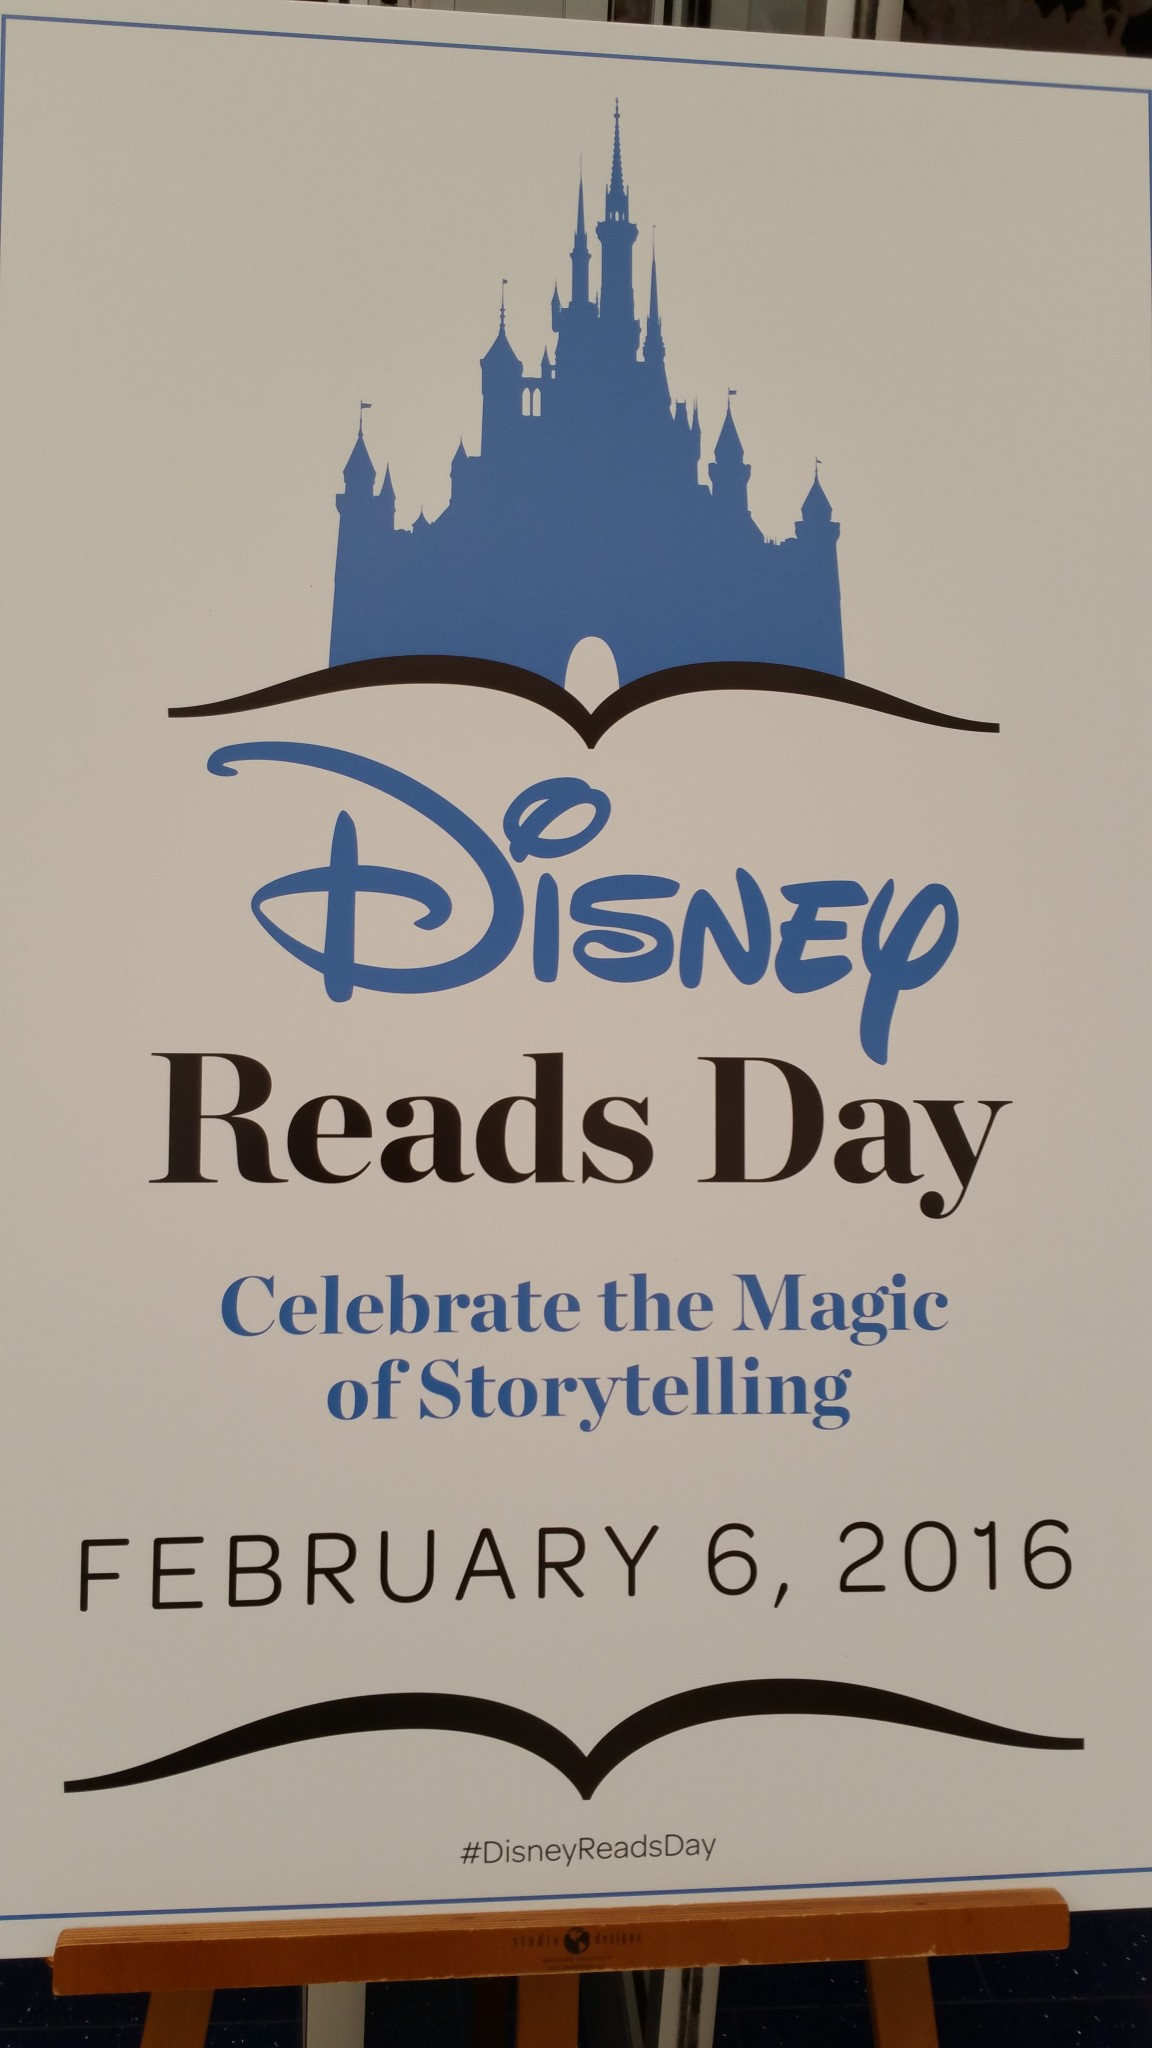 Disney Reads Day Brings The Magic Of Storytelling!